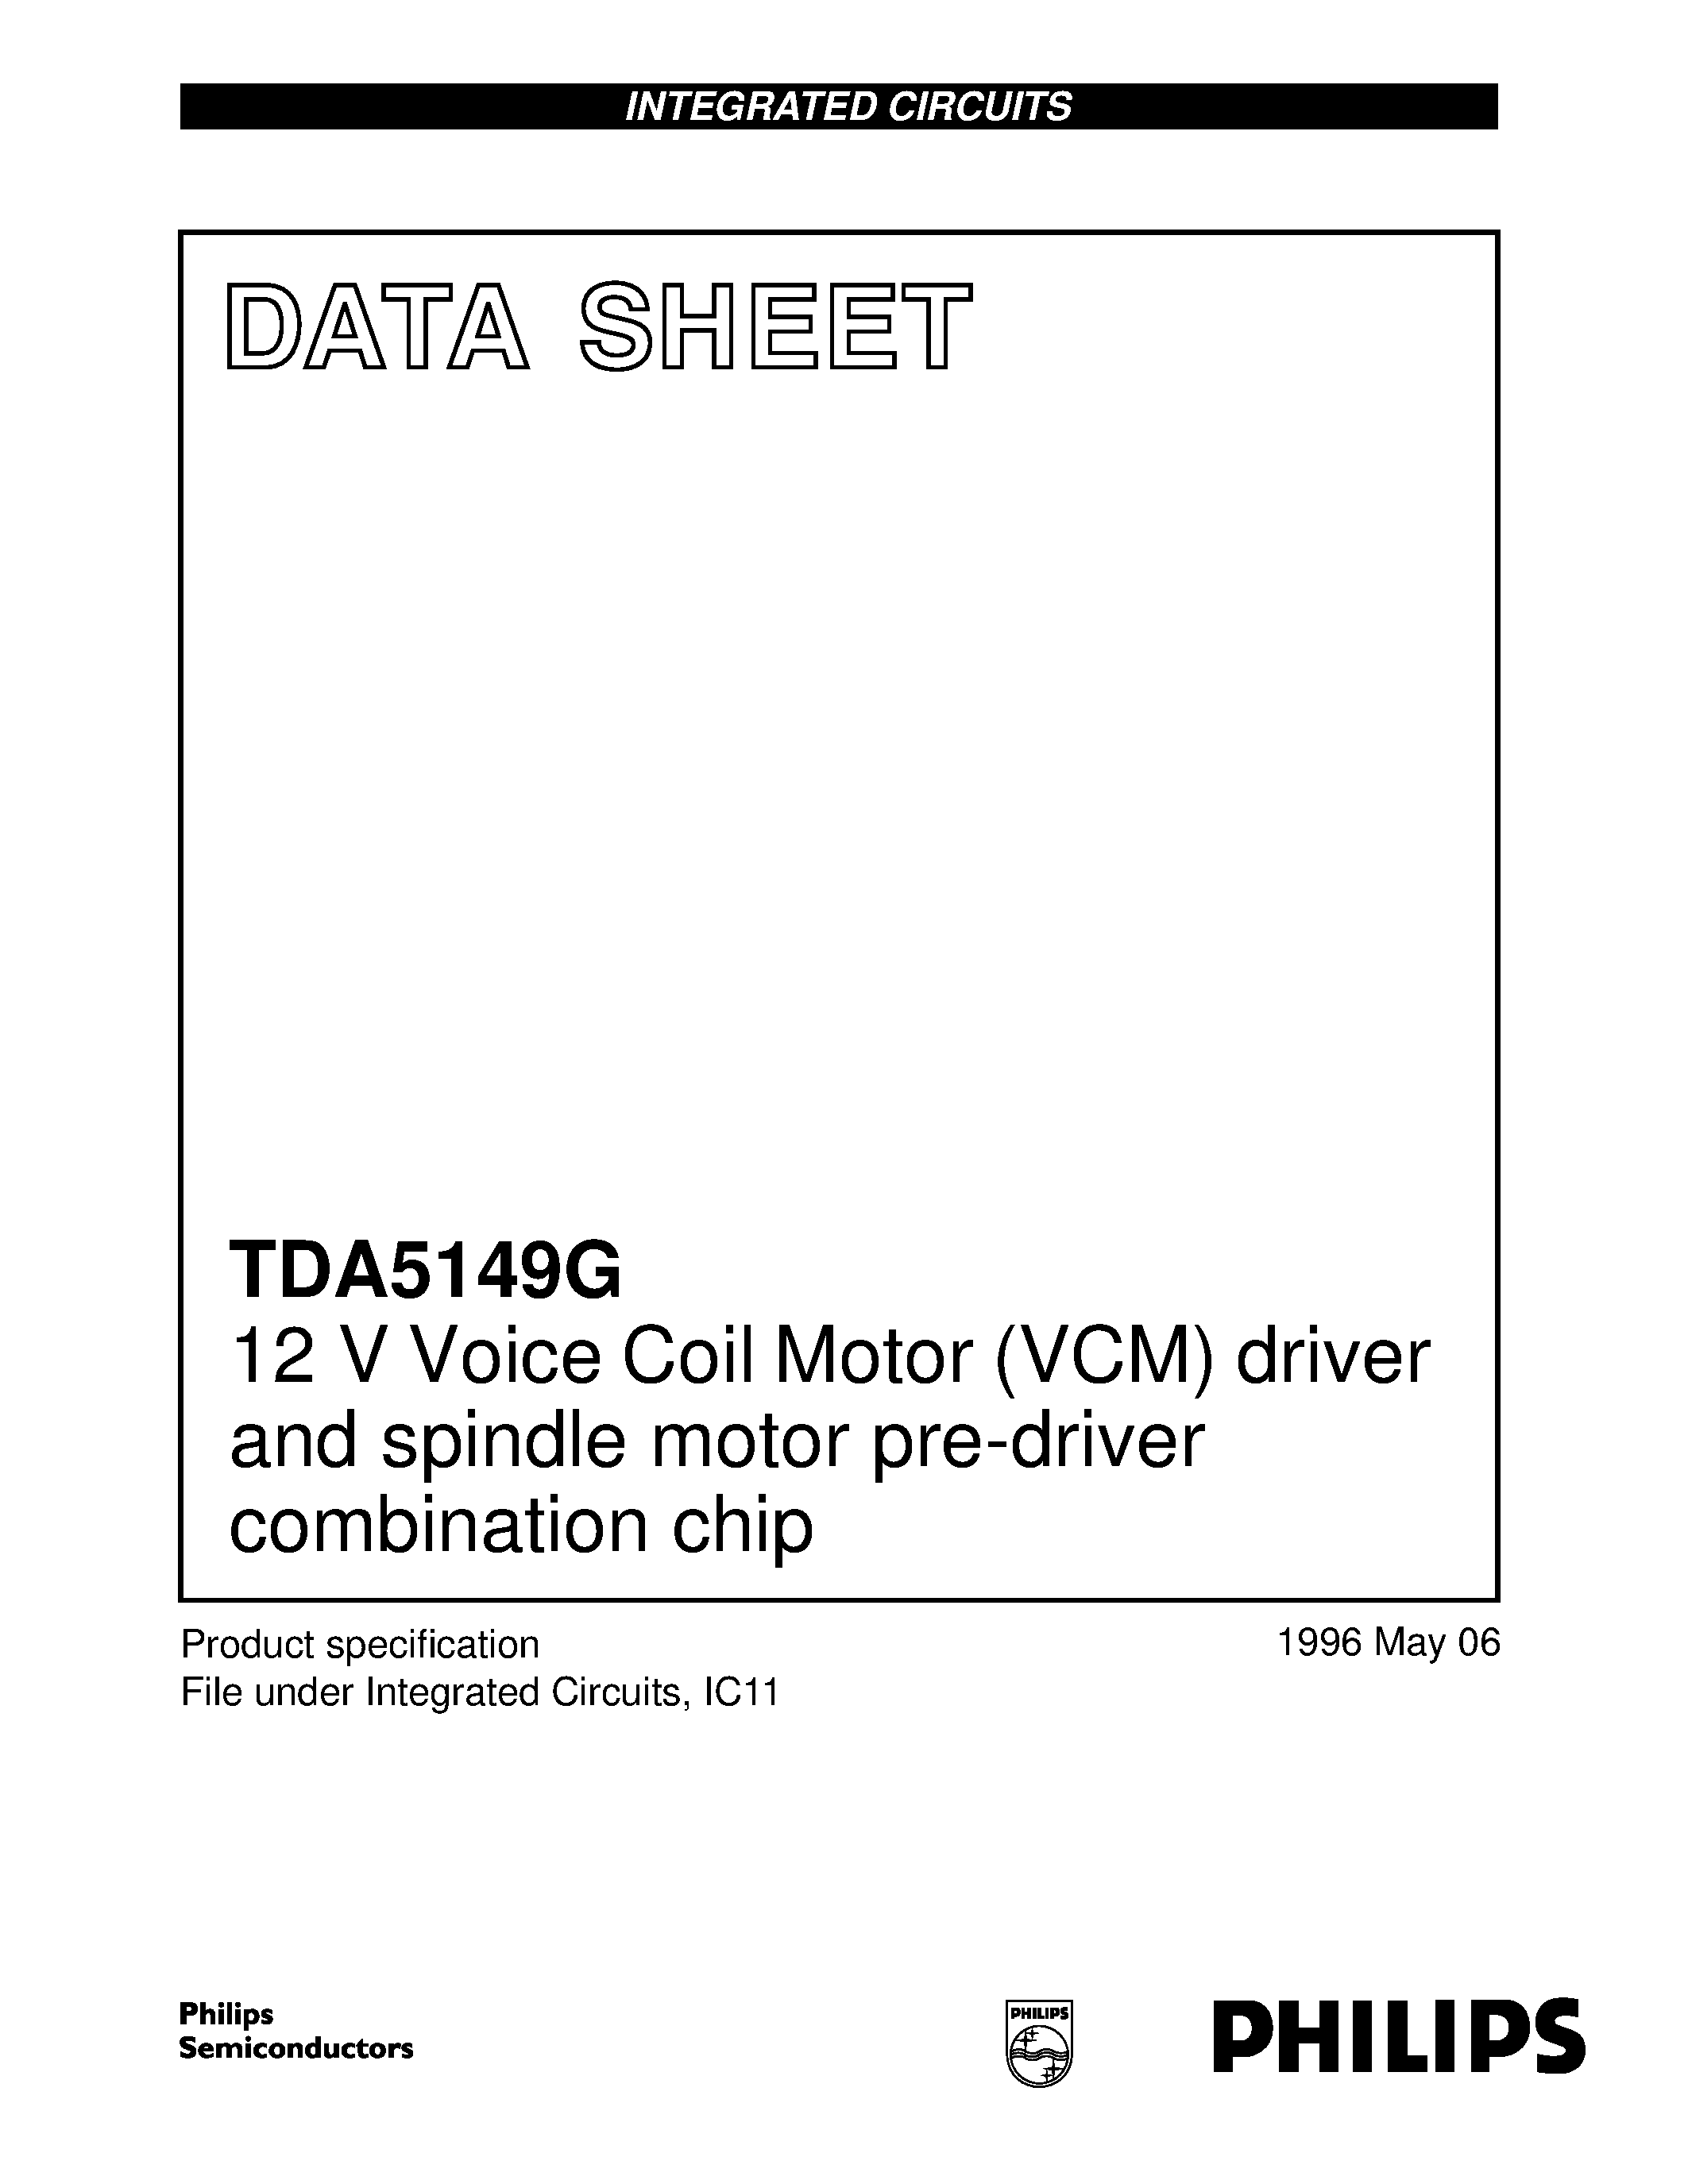 Datasheet TDA5149 - 12 V Voice Coil Motor VCM driver and spindle motor pre-driver combination chip page 1